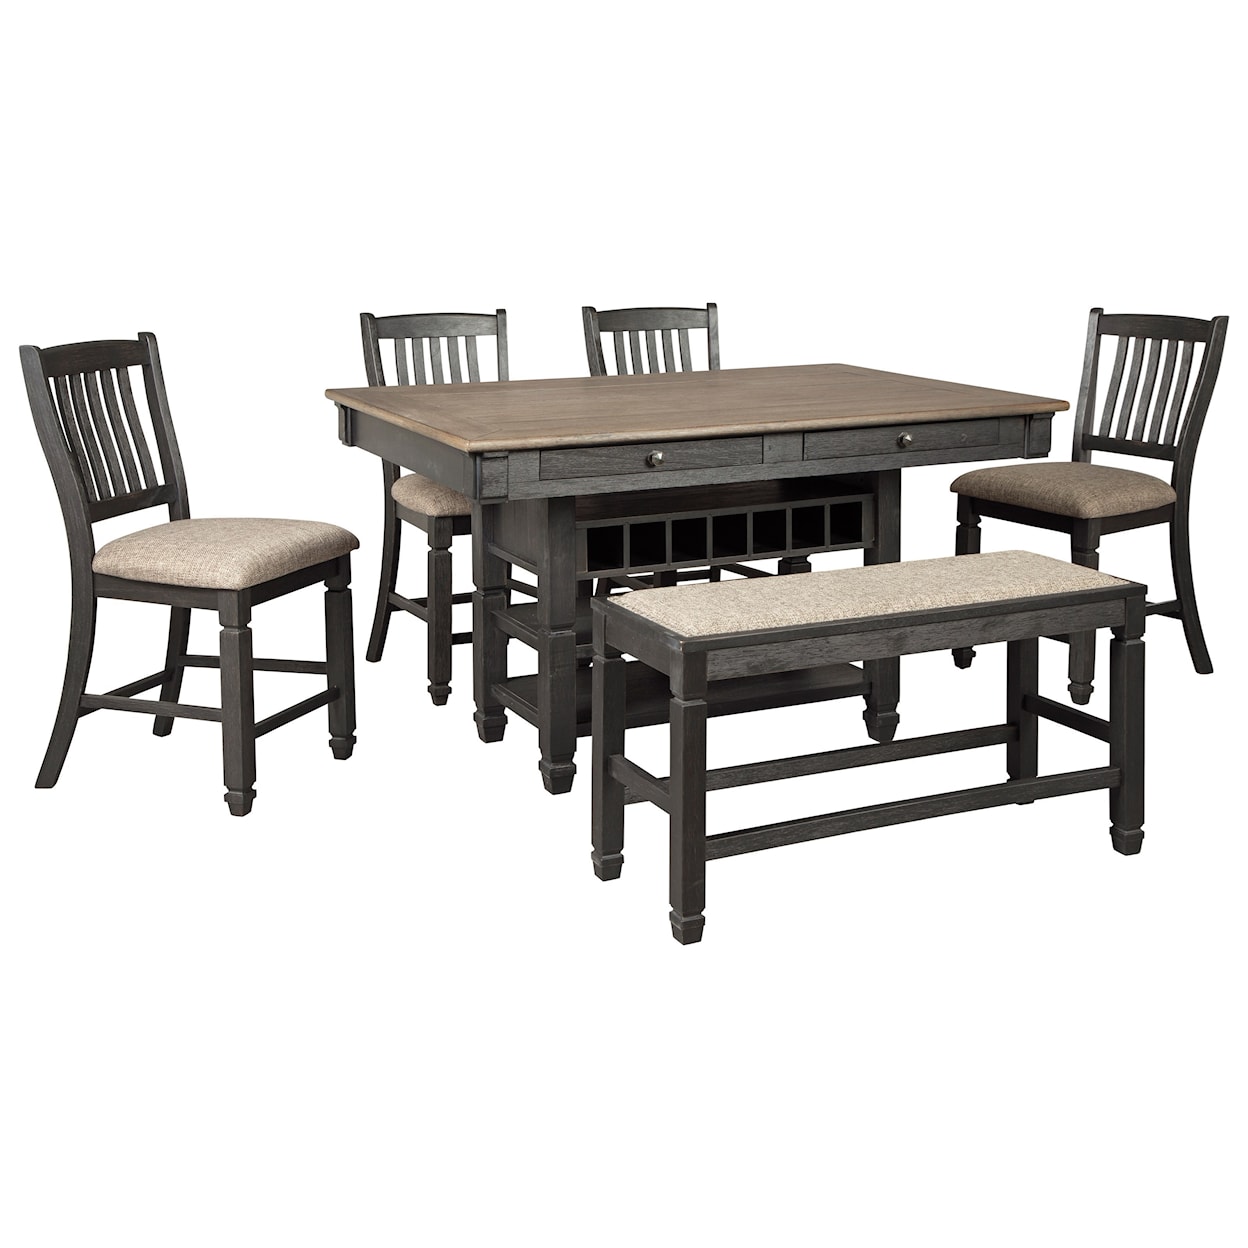 Benchcraft Tyler Creek 6-Piece Counter Table Set with Bench